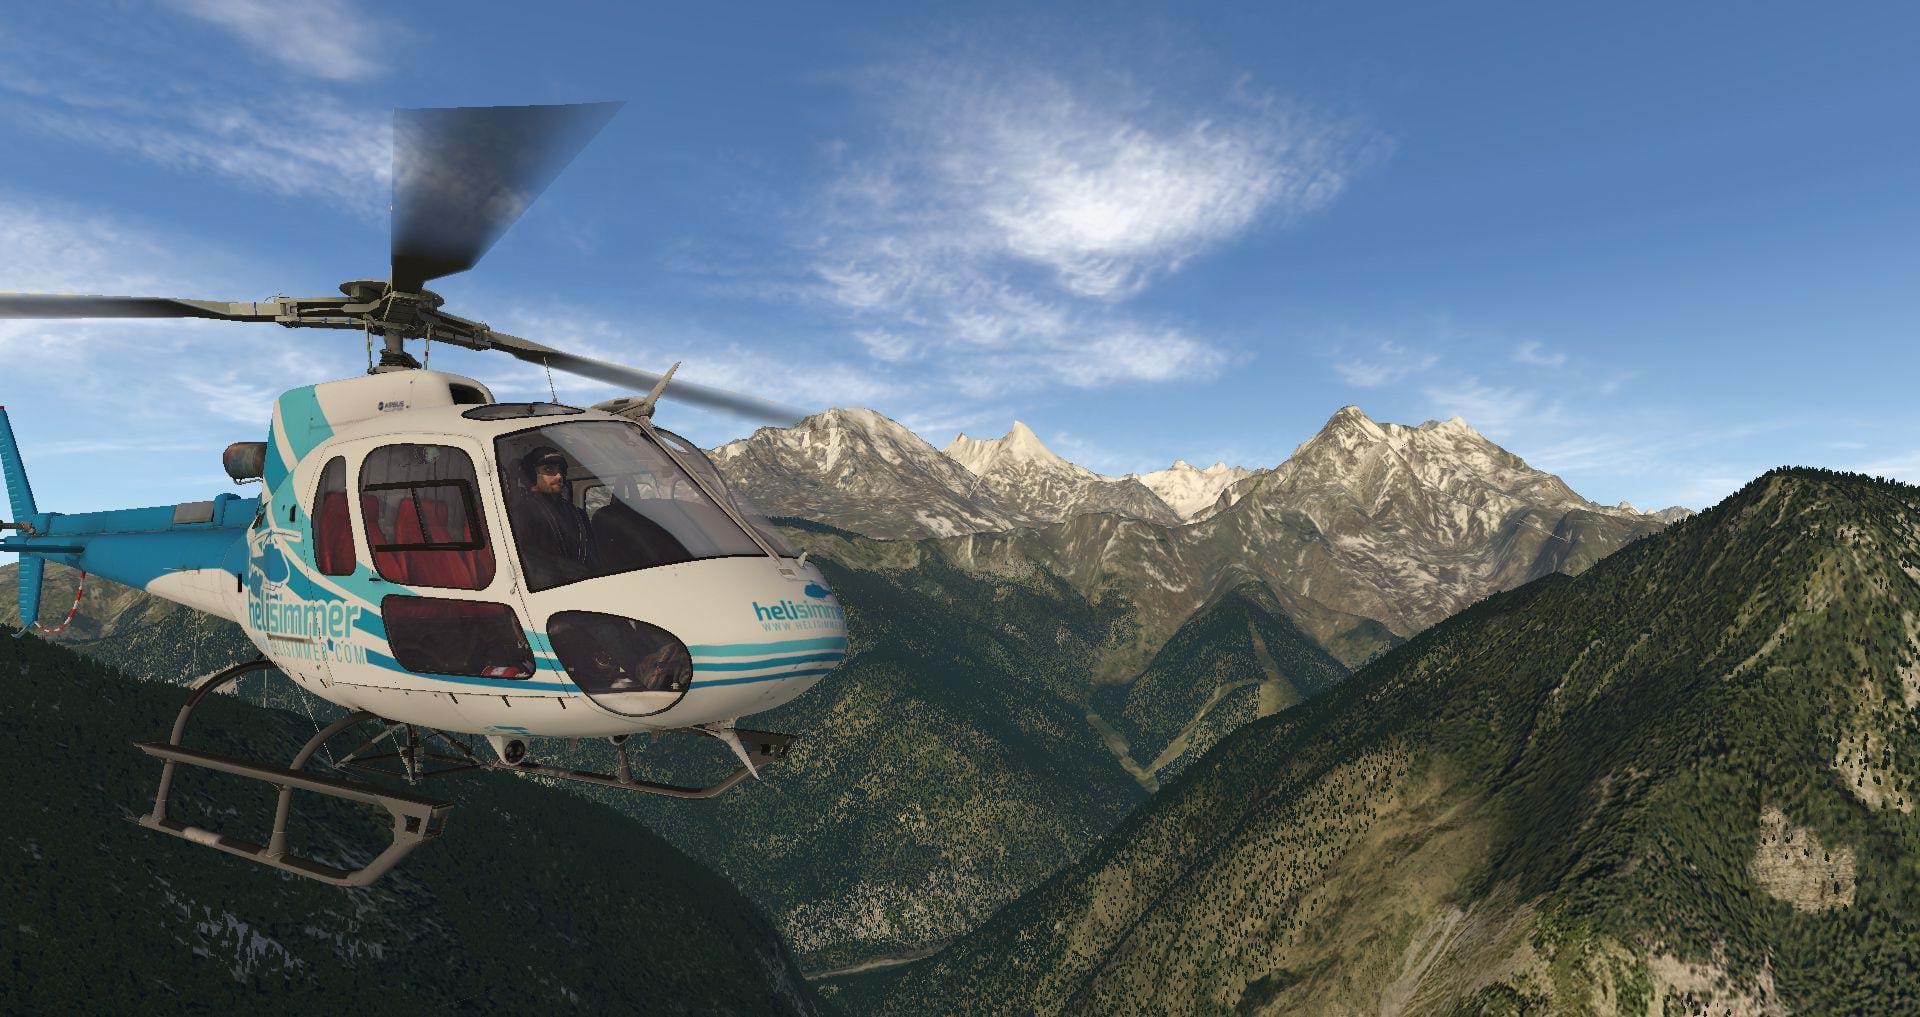 Frank Dainese and Fabio Bellini Everest Park 3D for X-Plane